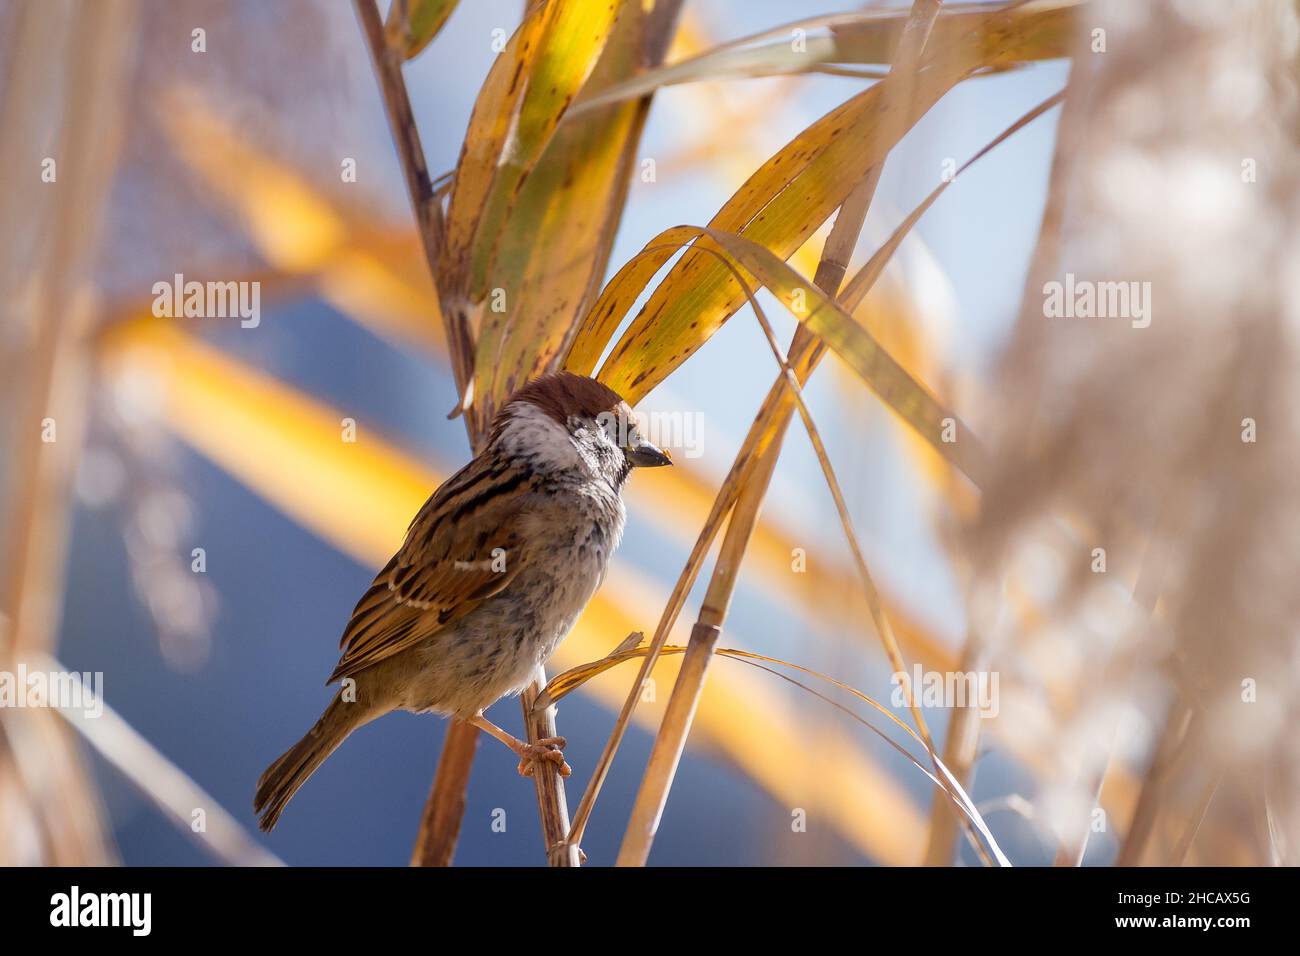 A male Eurasian Tree Sparrow (Passer montanus) on reeds in Ueno Park, Tokyo, Japan. Stock Photo